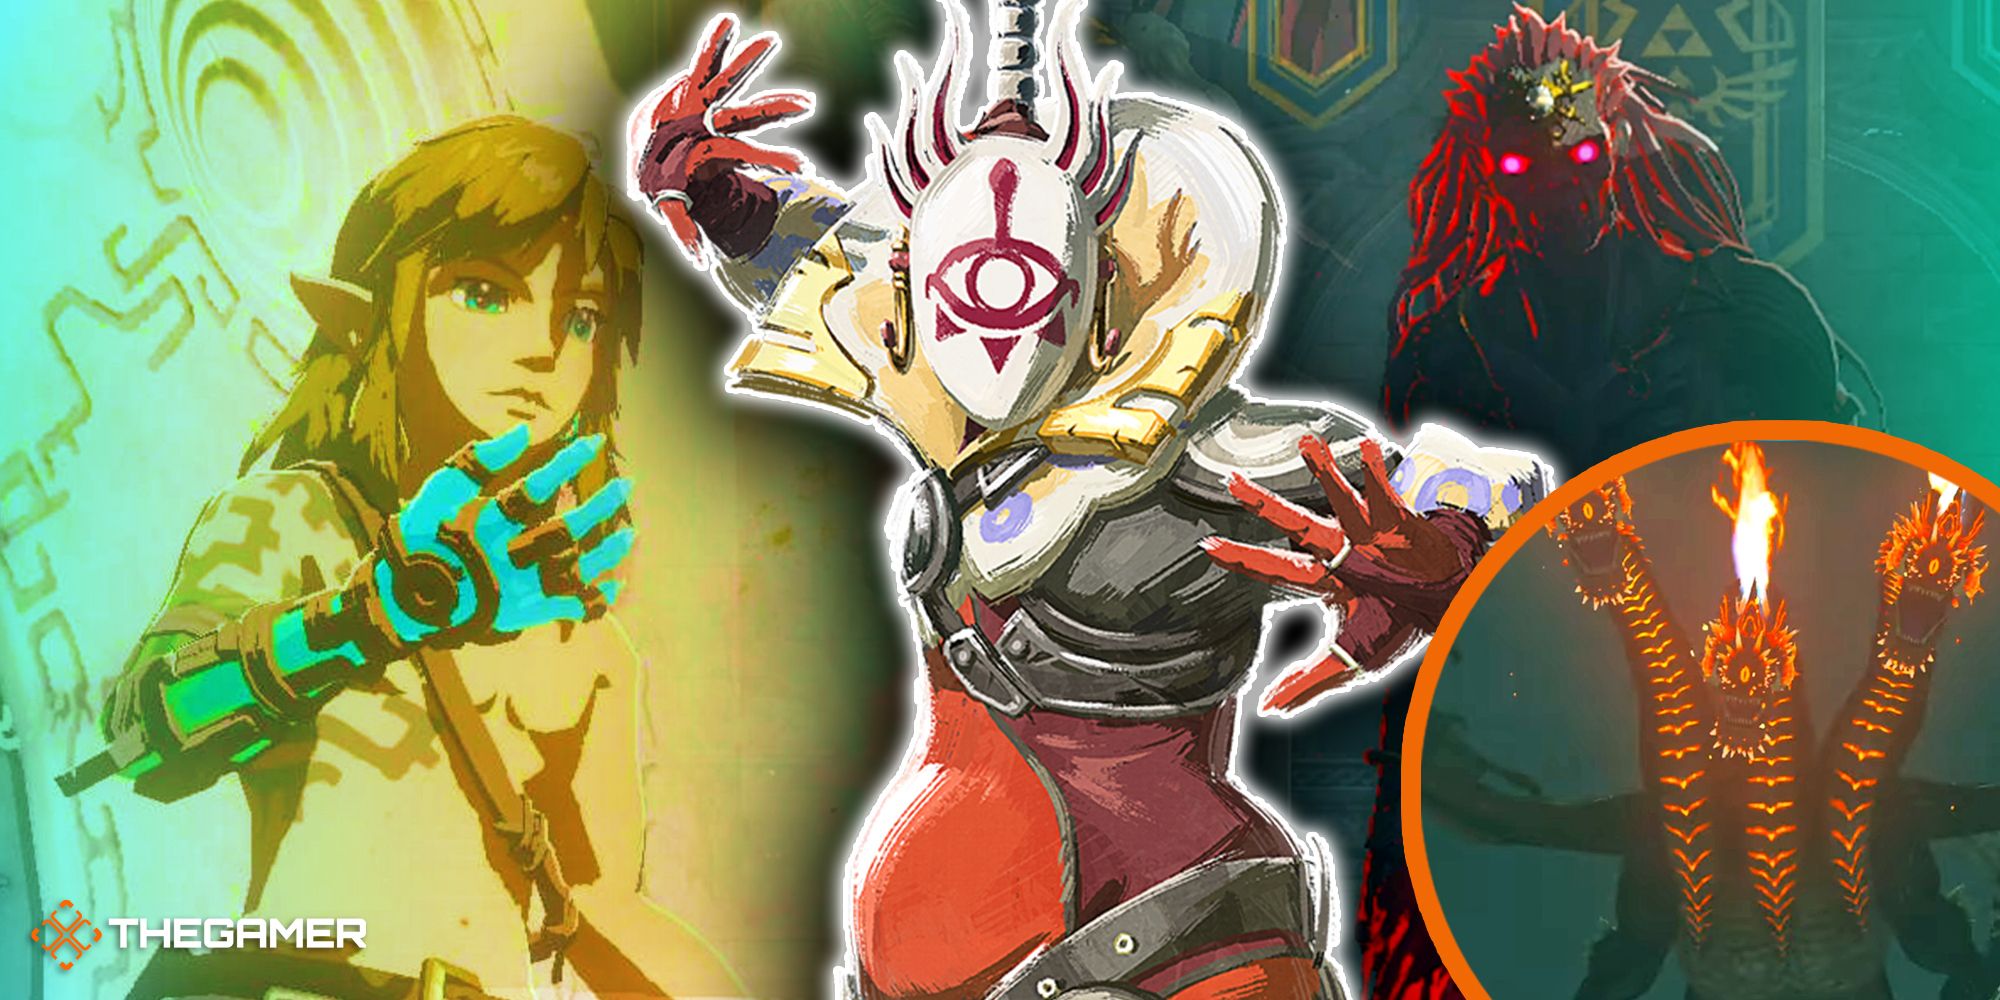 Link holds out his new arm with Master Kohga, Phantom Ganon, and the Fire Gleeok to the right.